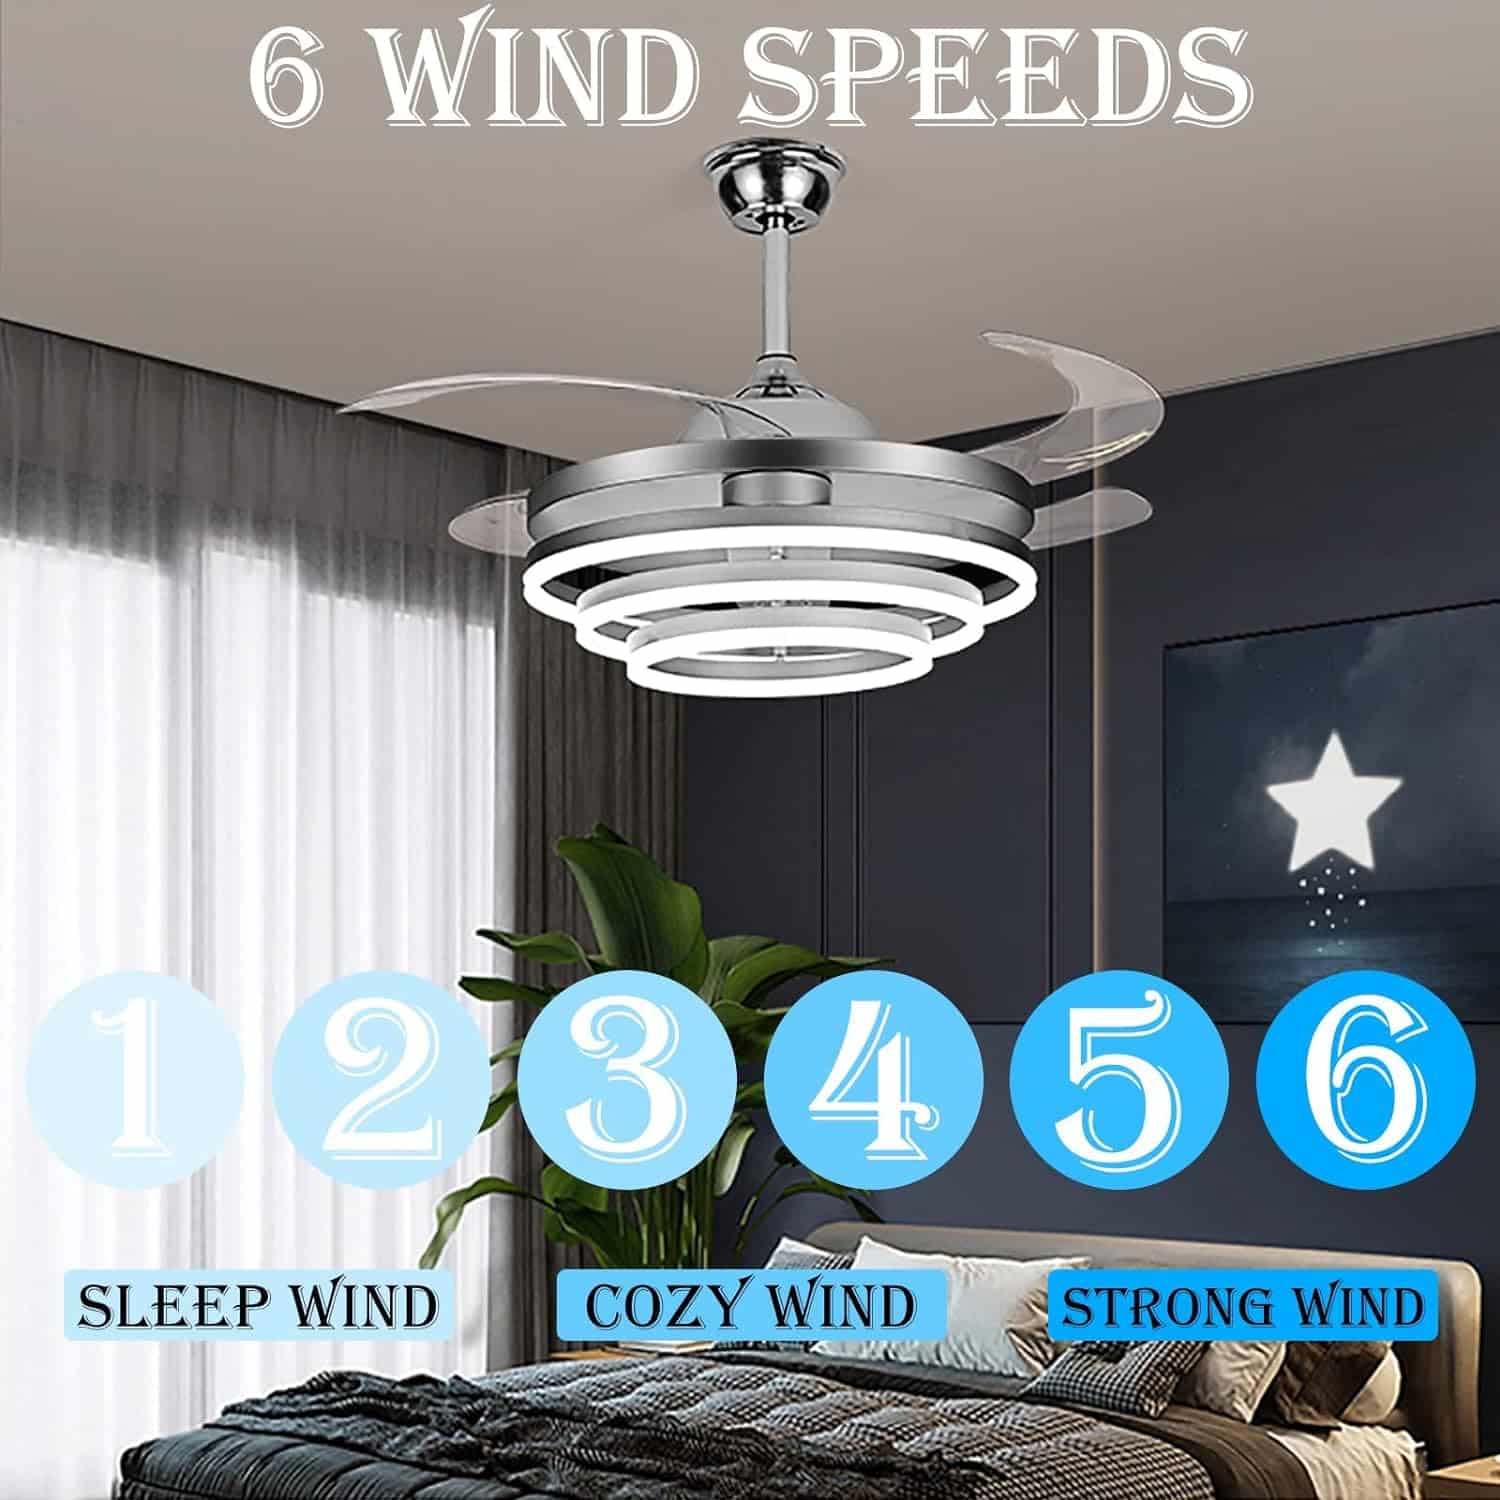 42 Invisible Ceiling Fan Chandelier Light,Modern DIY Ceiling Fan Light Remote Control 4 Retractable ABS Blades for Bedroom Living Dining Room Decoration (42, Gold)